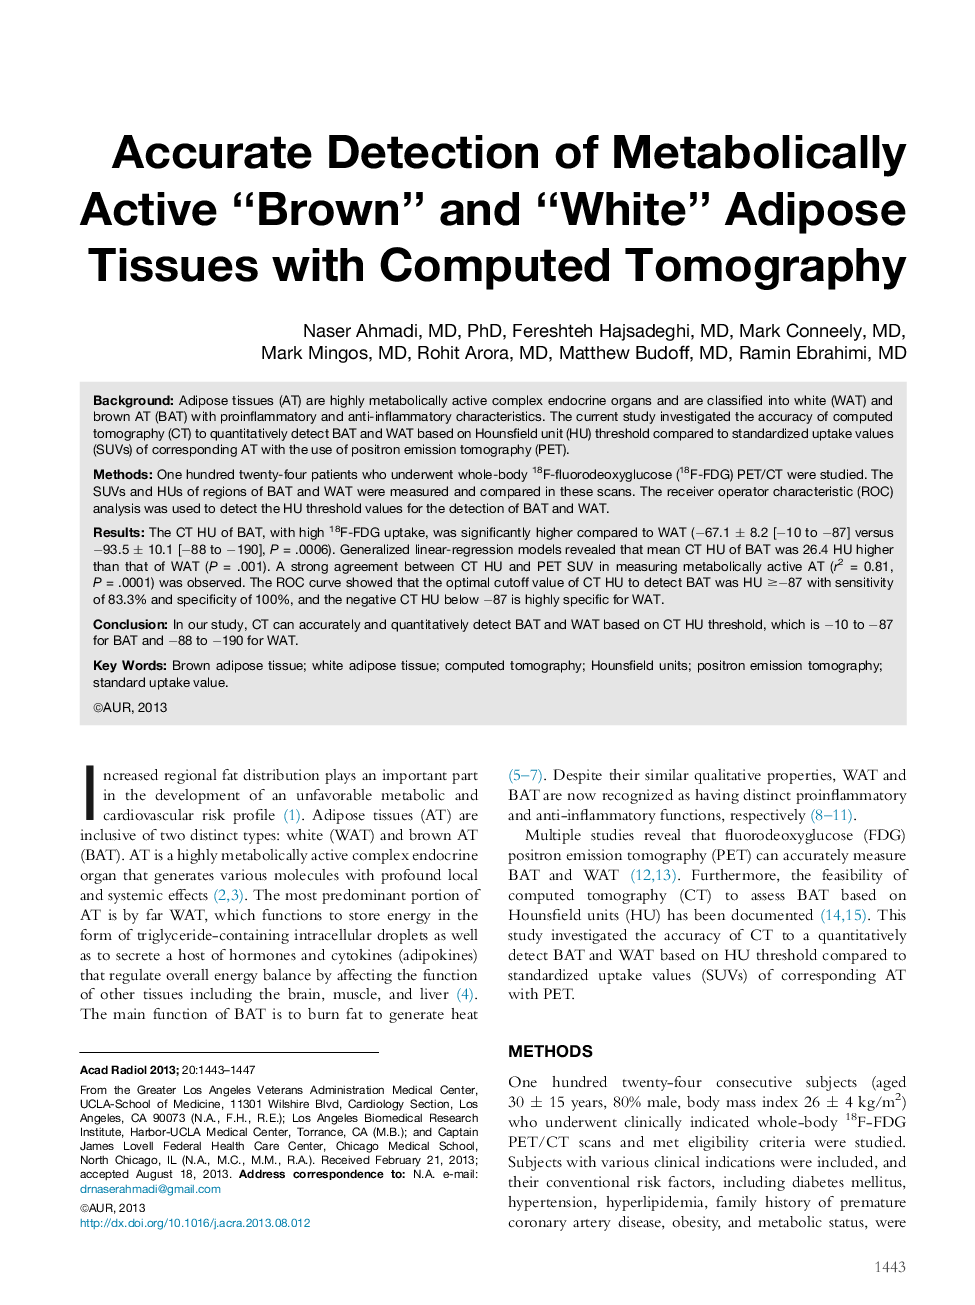 Accurate Detection of Metabolically Active “Brown” and “White” Adipose Tissues with Computed Tomography